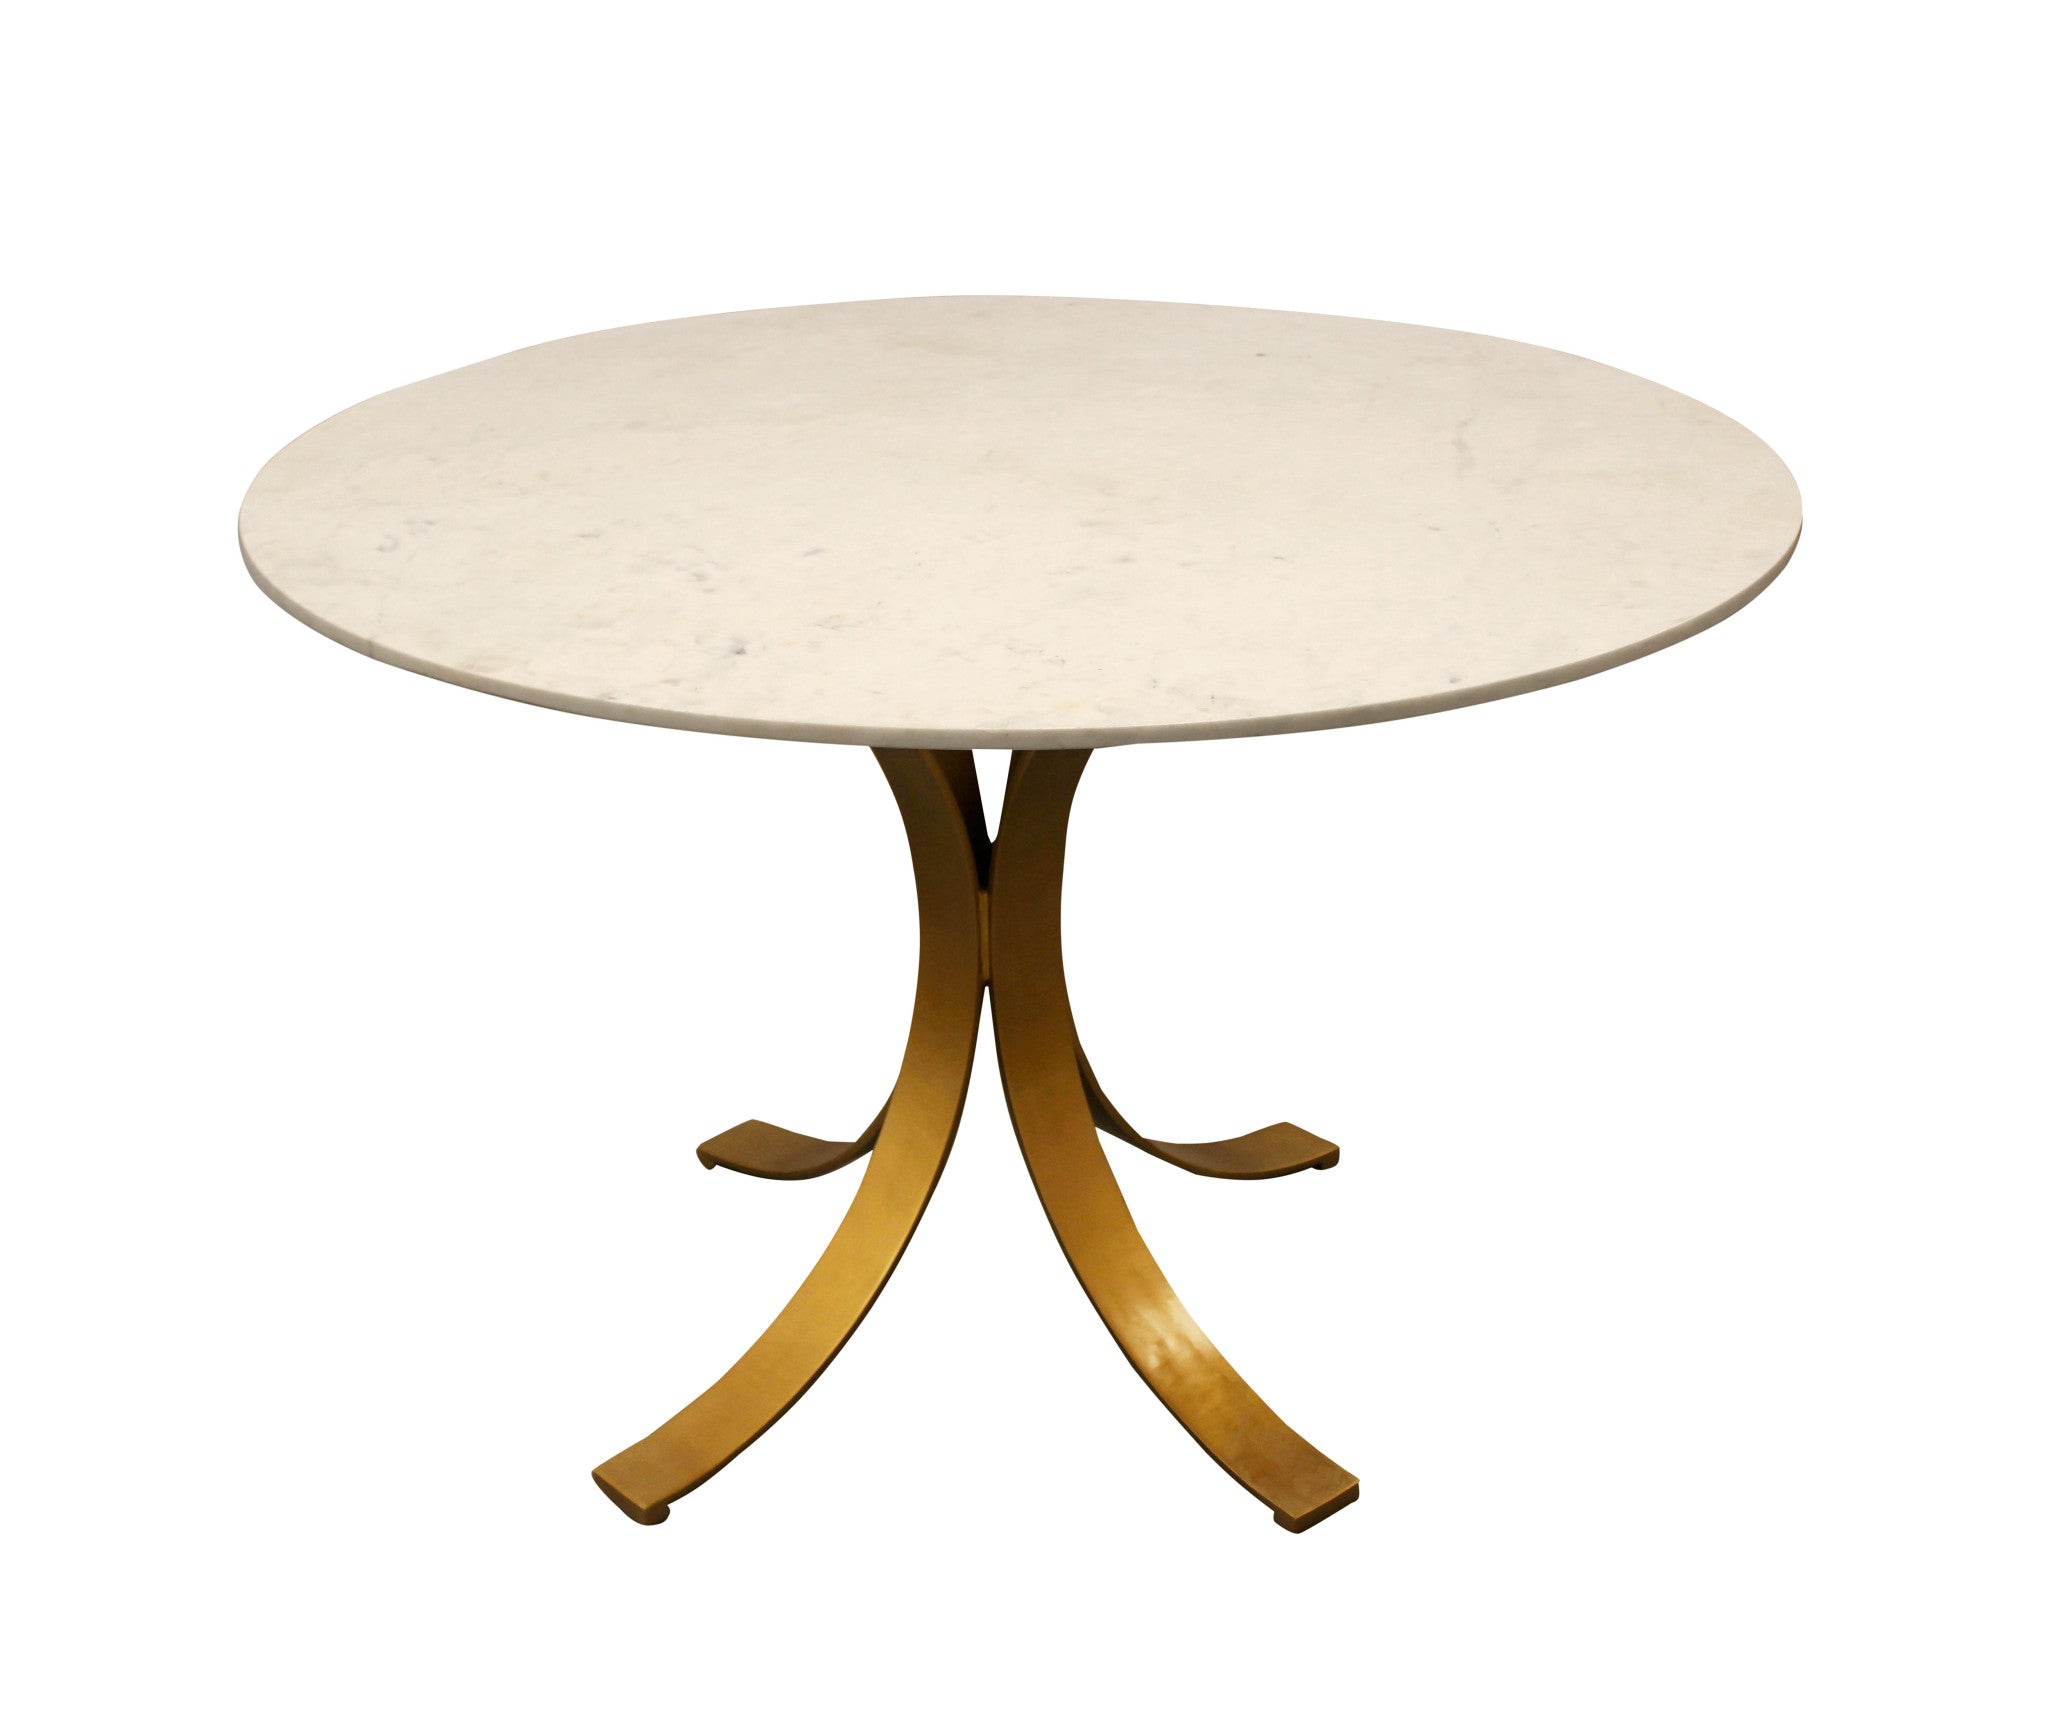 48" Ivory And Brass Rounded Marble And Iron Dining Table